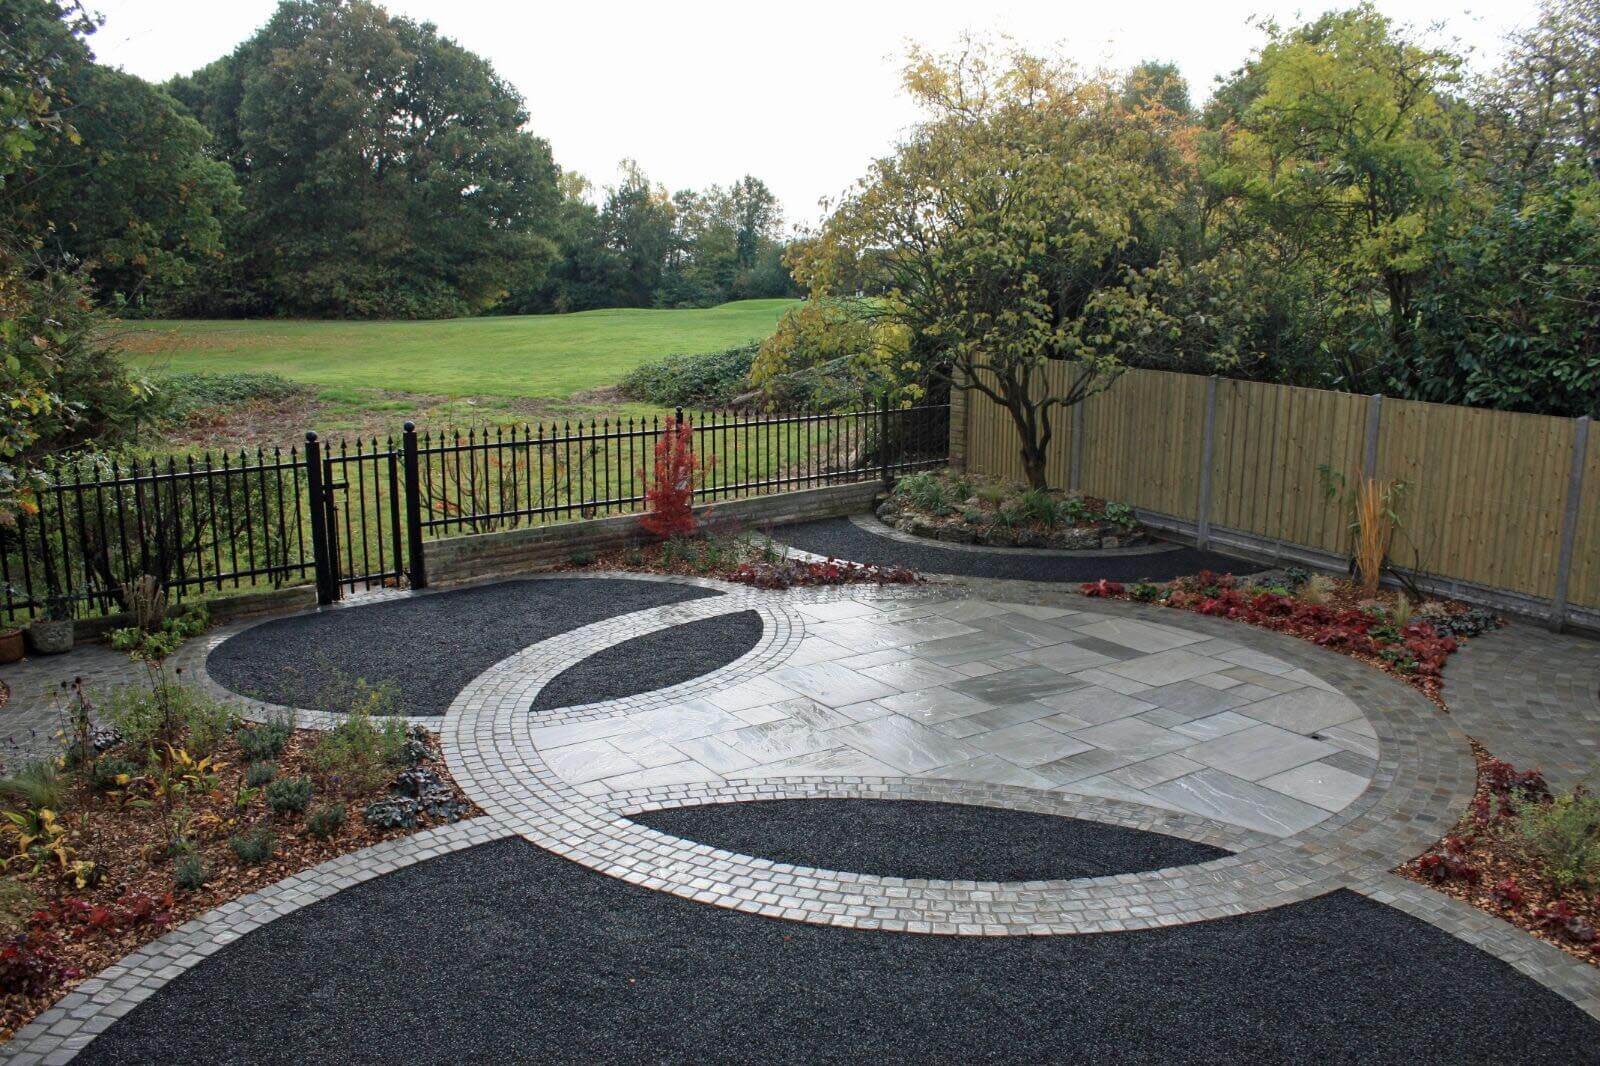 front garden view of basalt paving and fencing